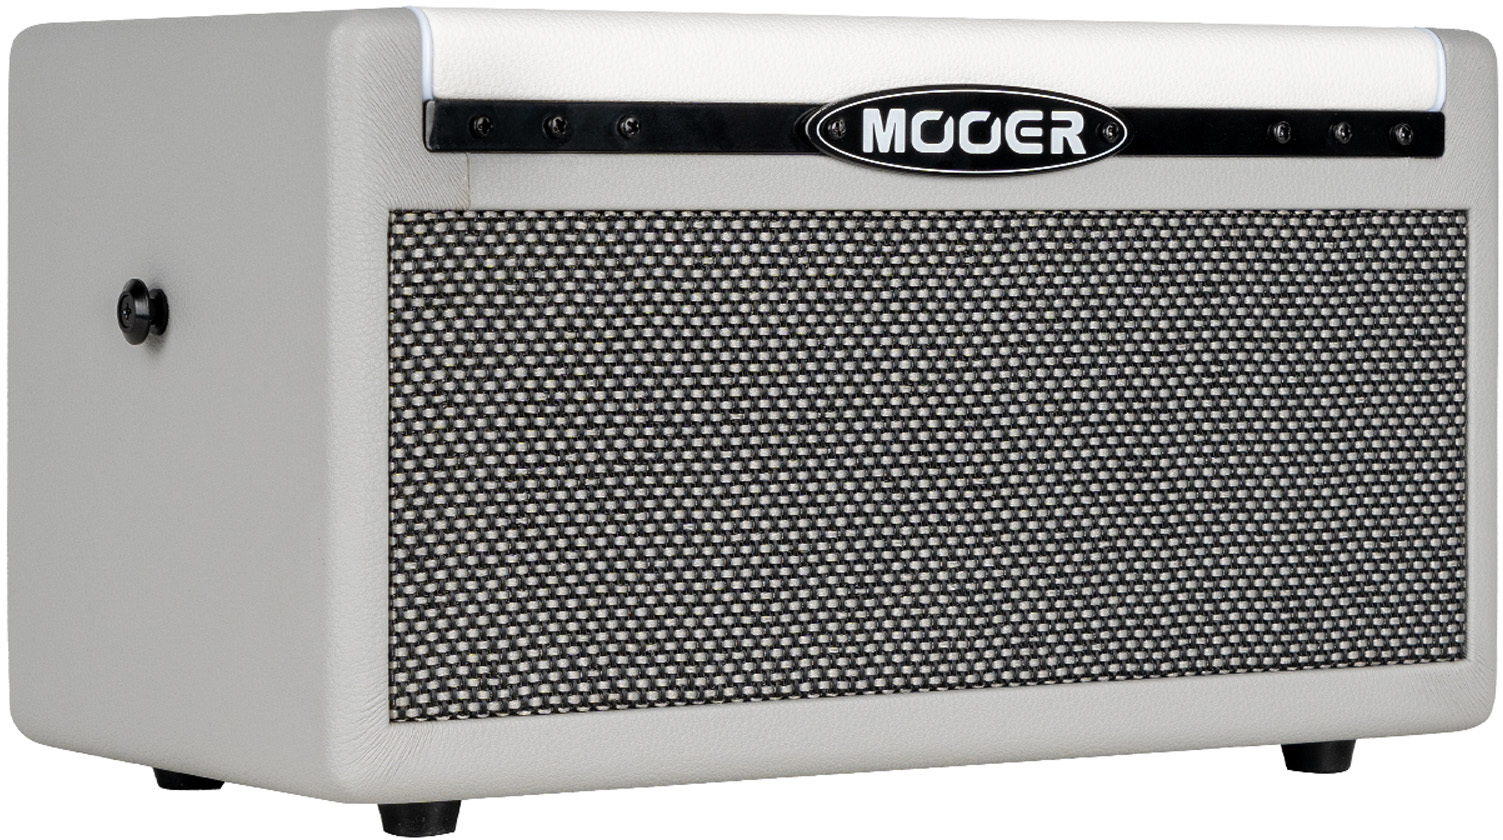 Mooer Sd30i 30w 2x4 - Electric guitar combo amp - Main picture